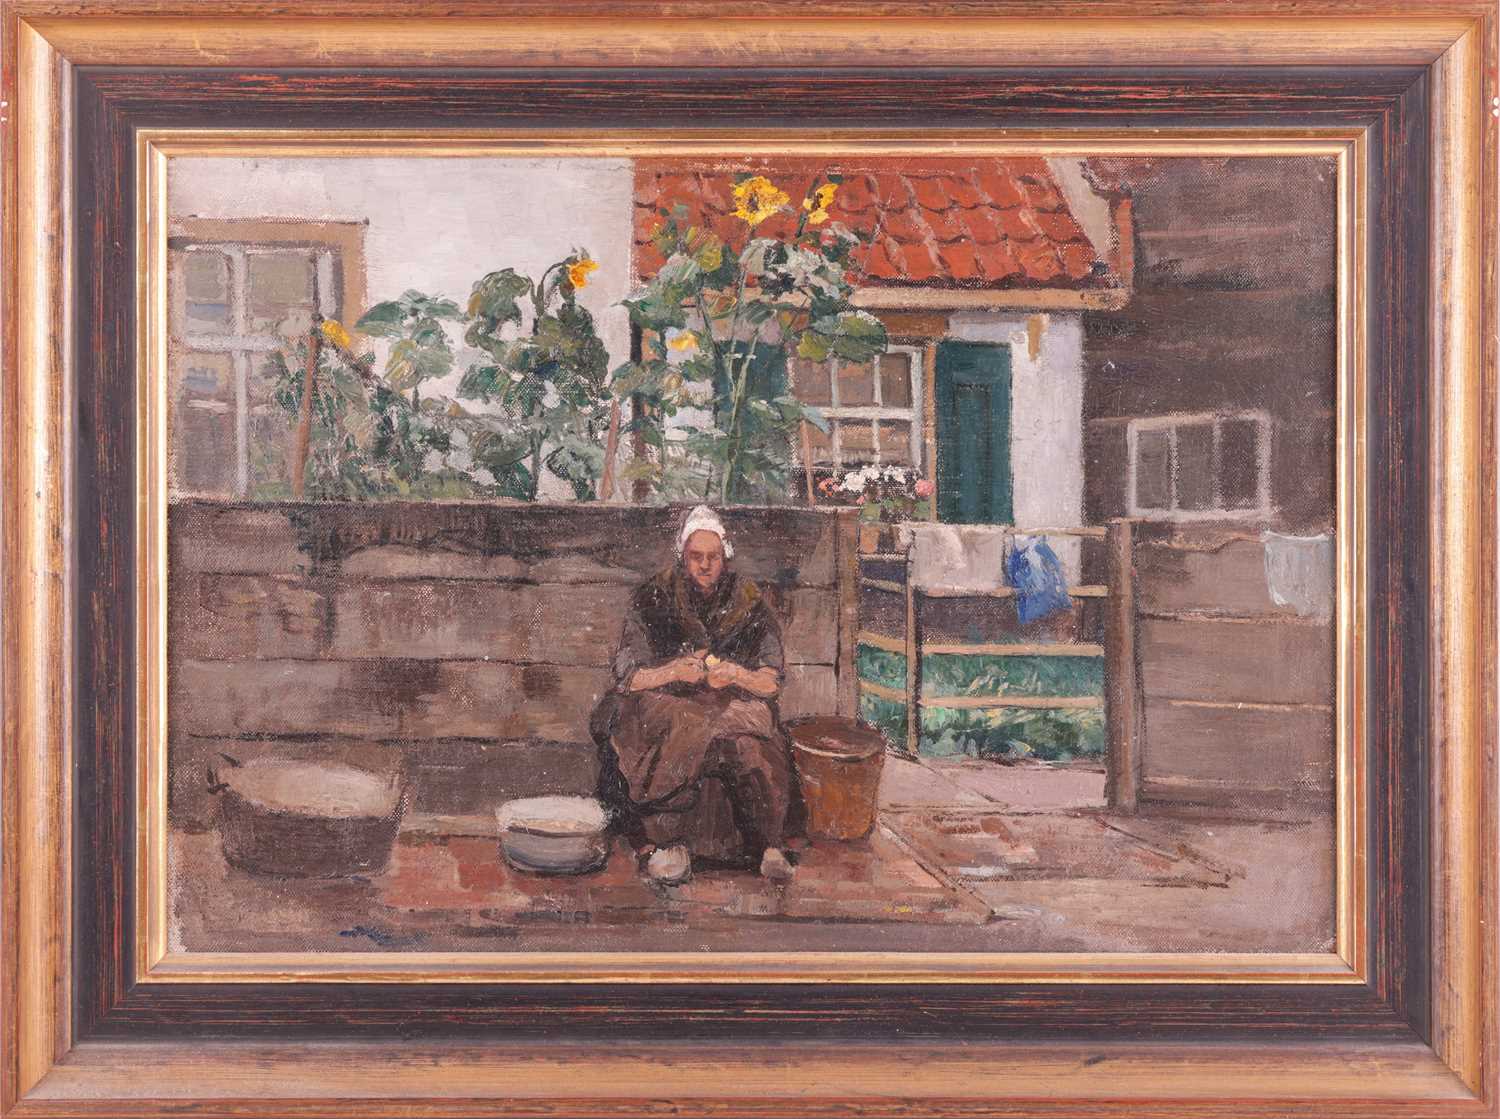 German Grobe (German, 1857-1938), woman peeling potatoes outside her home, unsigned, oil on canvas m - Image 2 of 7